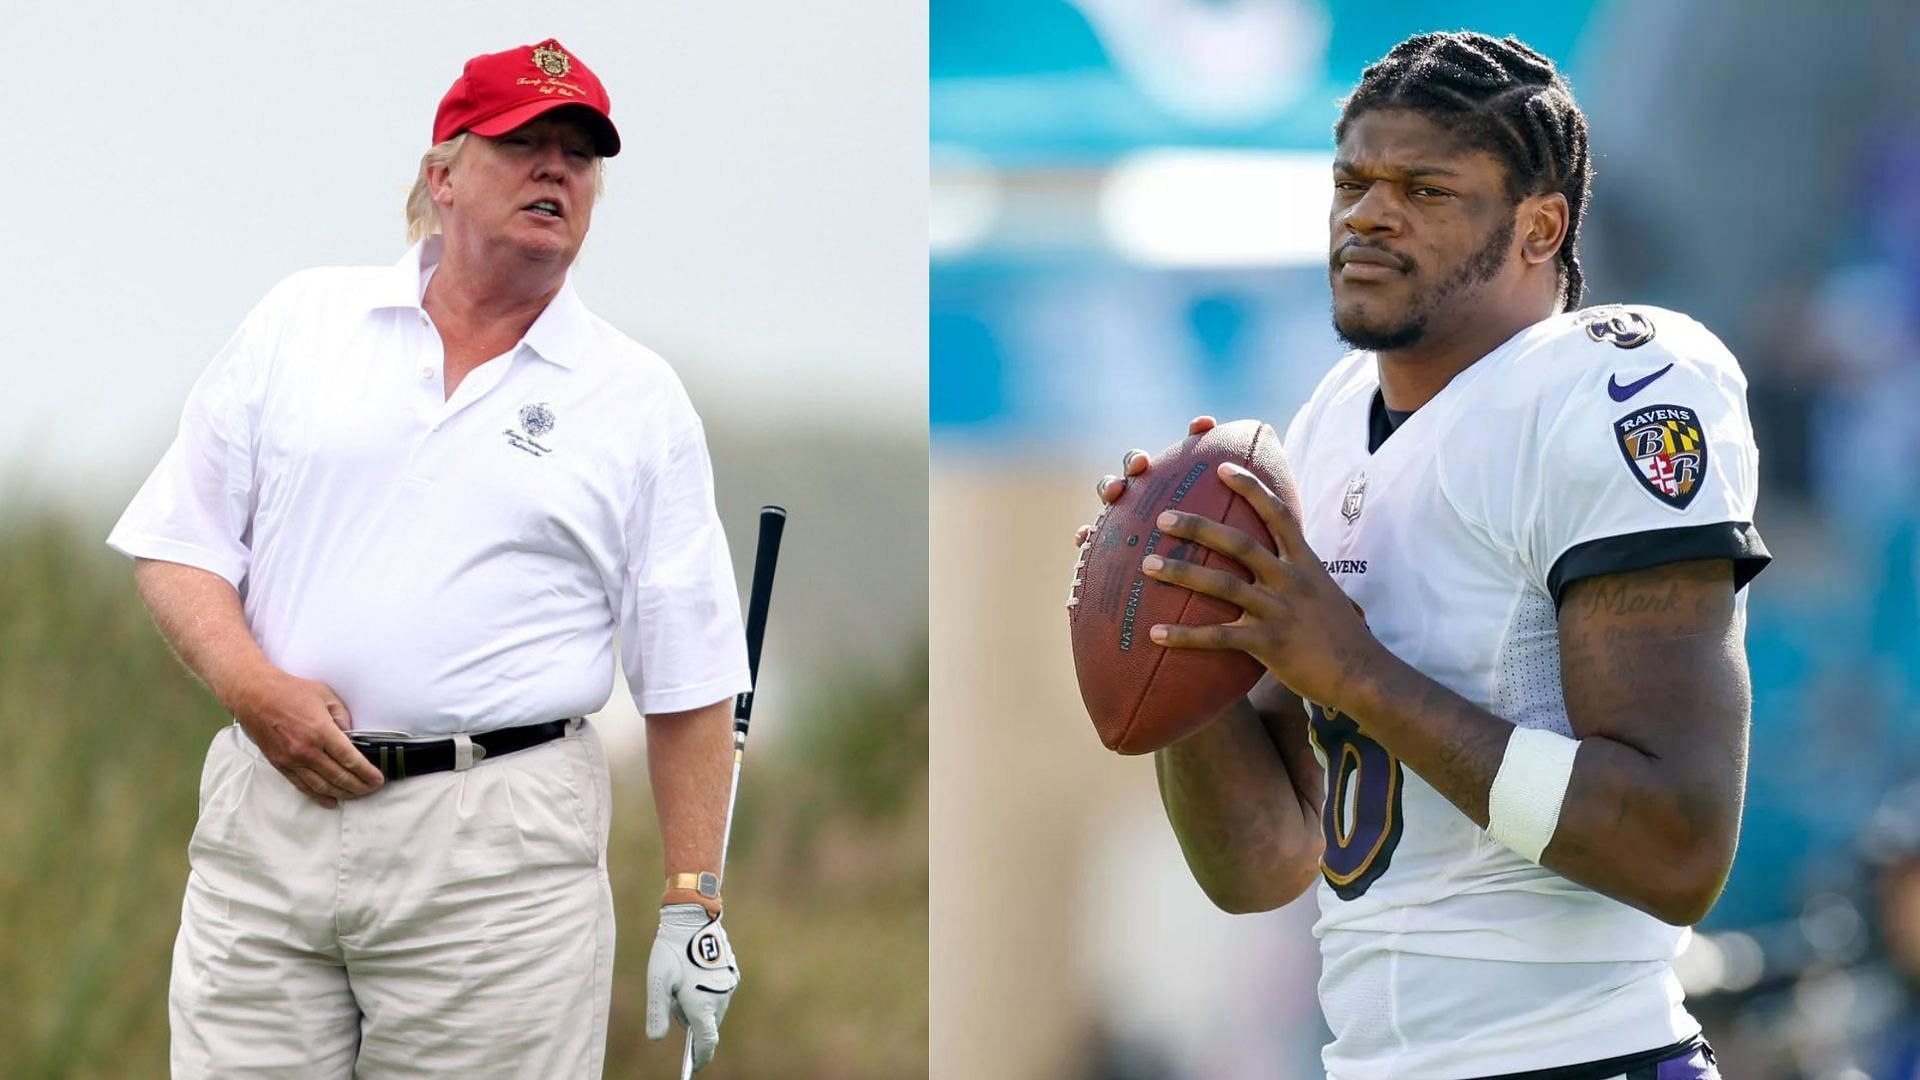 NFL fans call out size and weight of Donald Trump (L) when compared to Lamar Jackson (R)